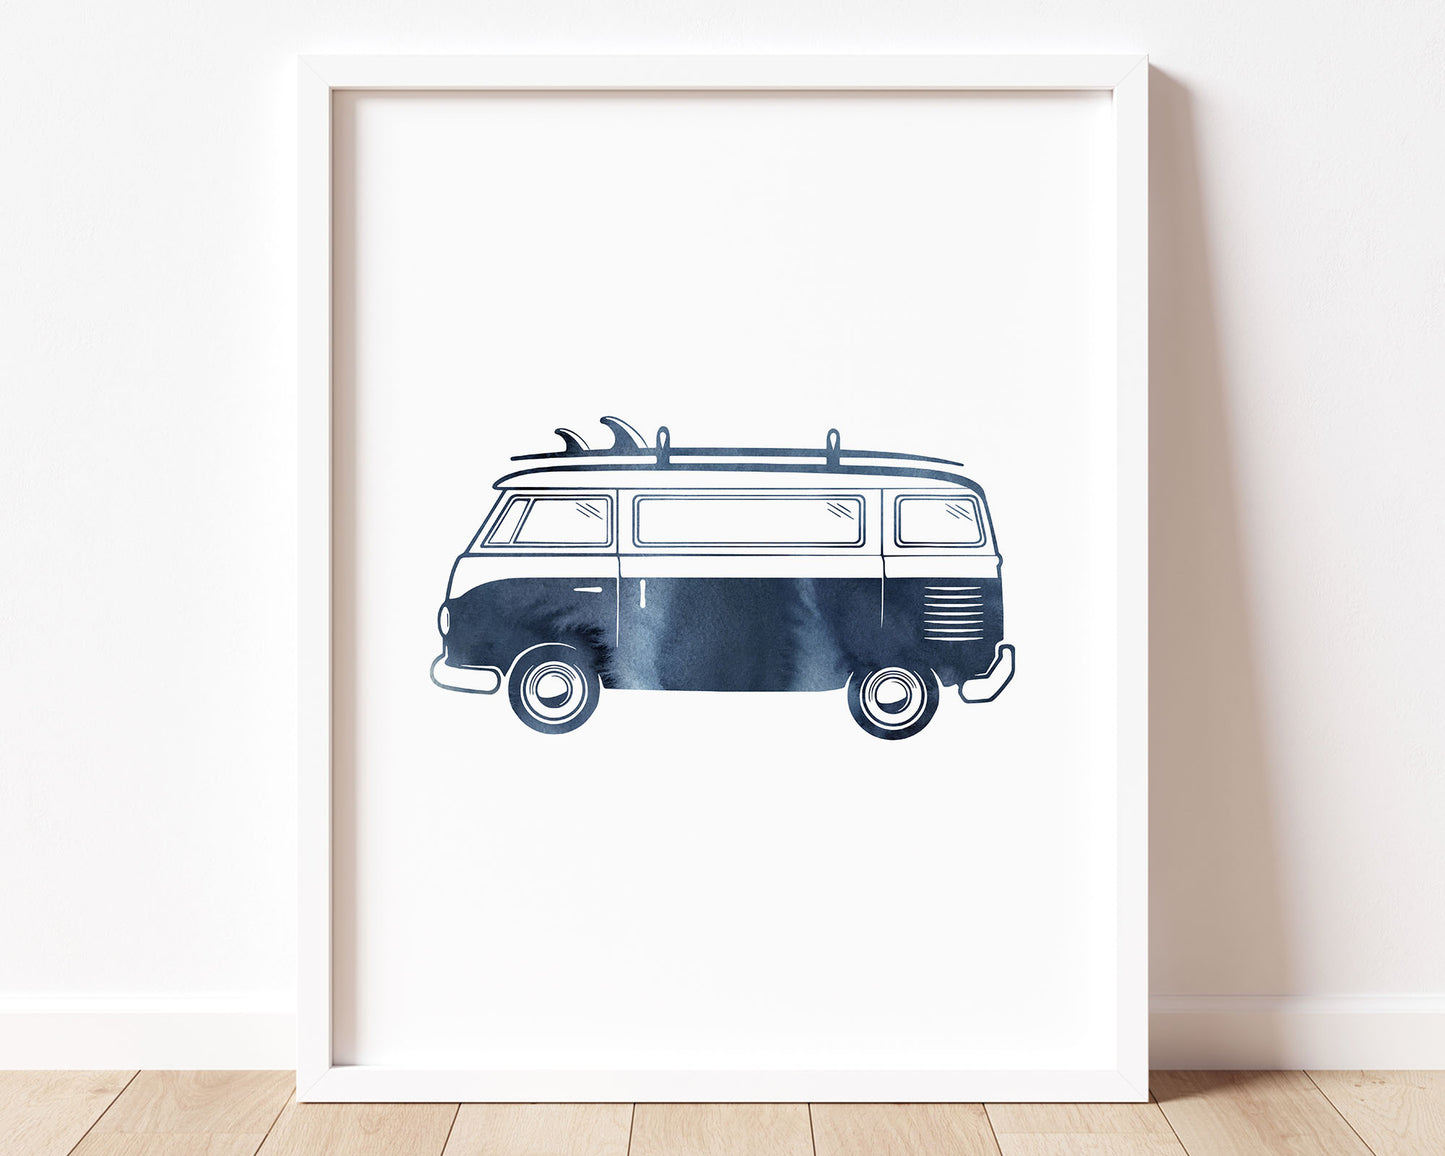 Watercolor Surf Van Printable Wall Art featuring navy blue watercolor illustration of a retro van with a surfboard on top. Perfect for Baby Boy Surf Nursery Decor, Baby Girl Surf Nursery Wall Art, Kids Coastal Bedroom Decor, Children's Beach Bathroom Wall Art or California Beach Wall Art Playroom Decor.